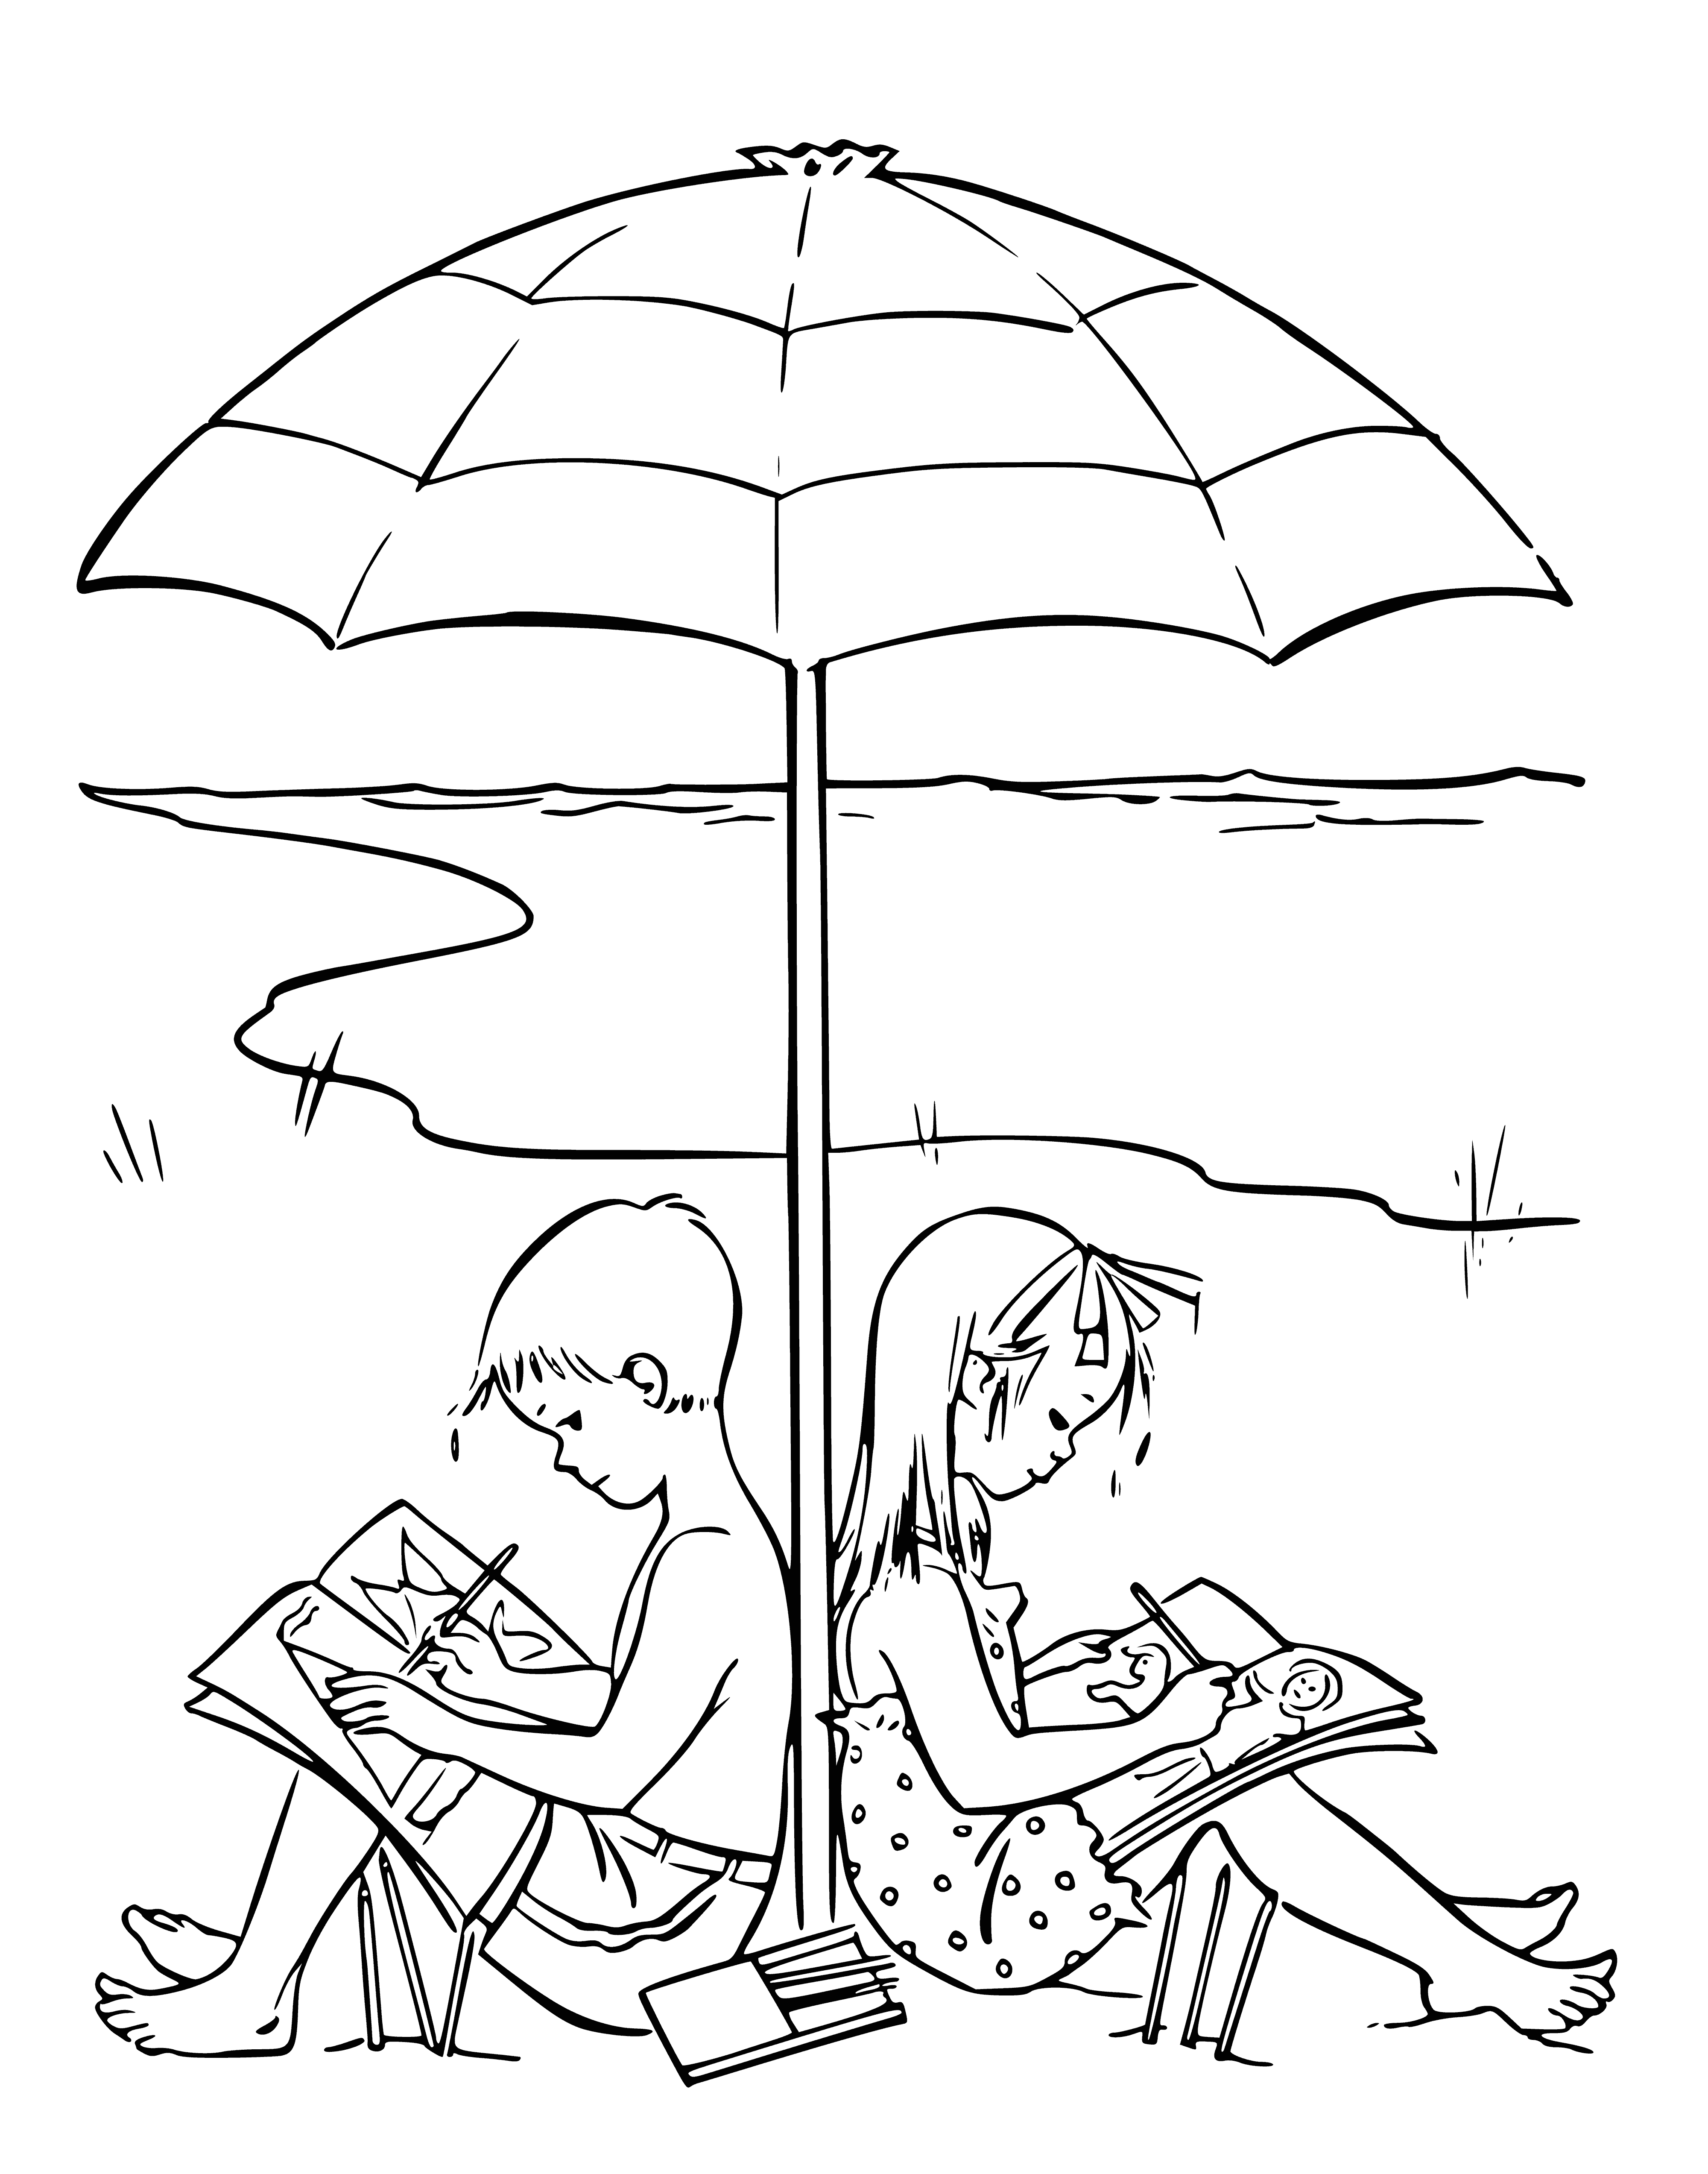 Children in the summer on the beach under an umbrella coloring page